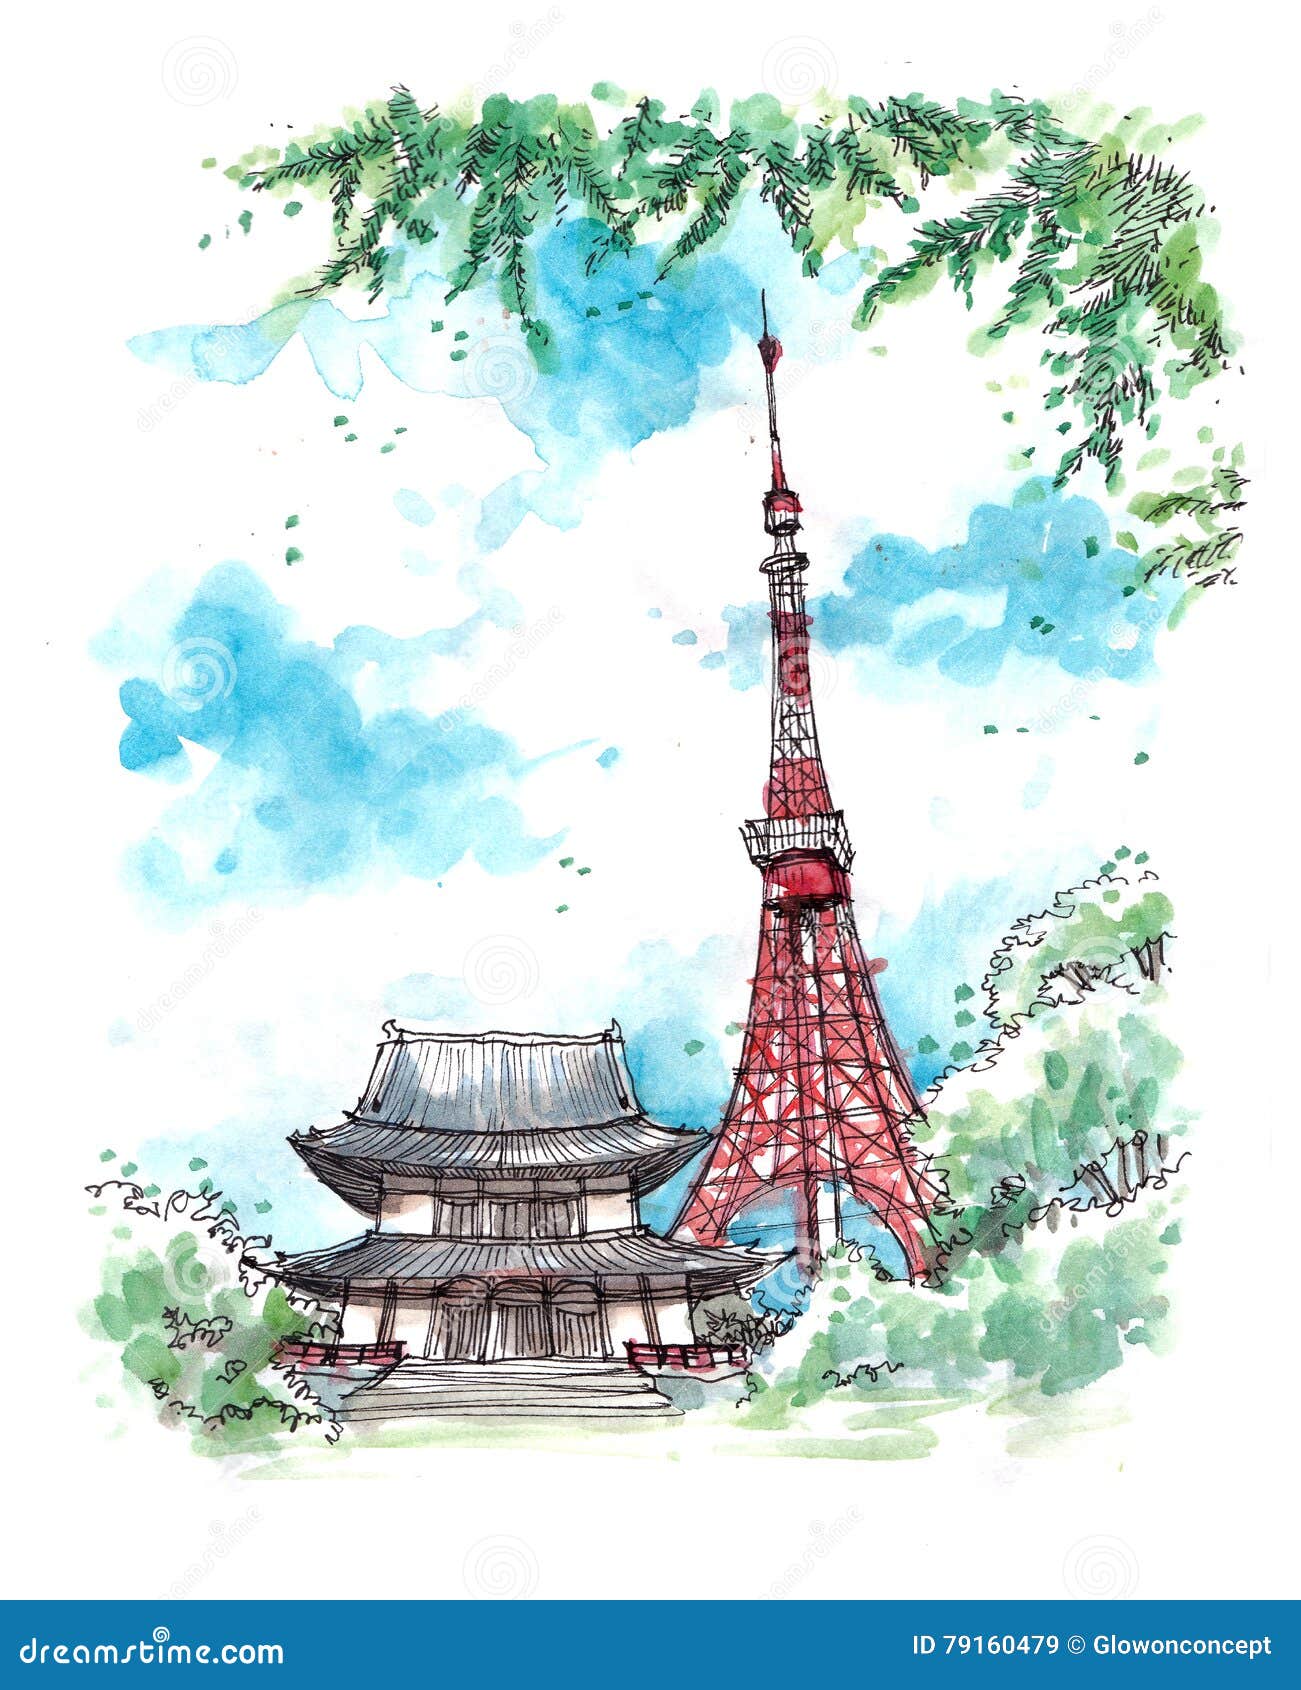 How to draw Tokyo Tower emoji step by step for beginners  YouTube